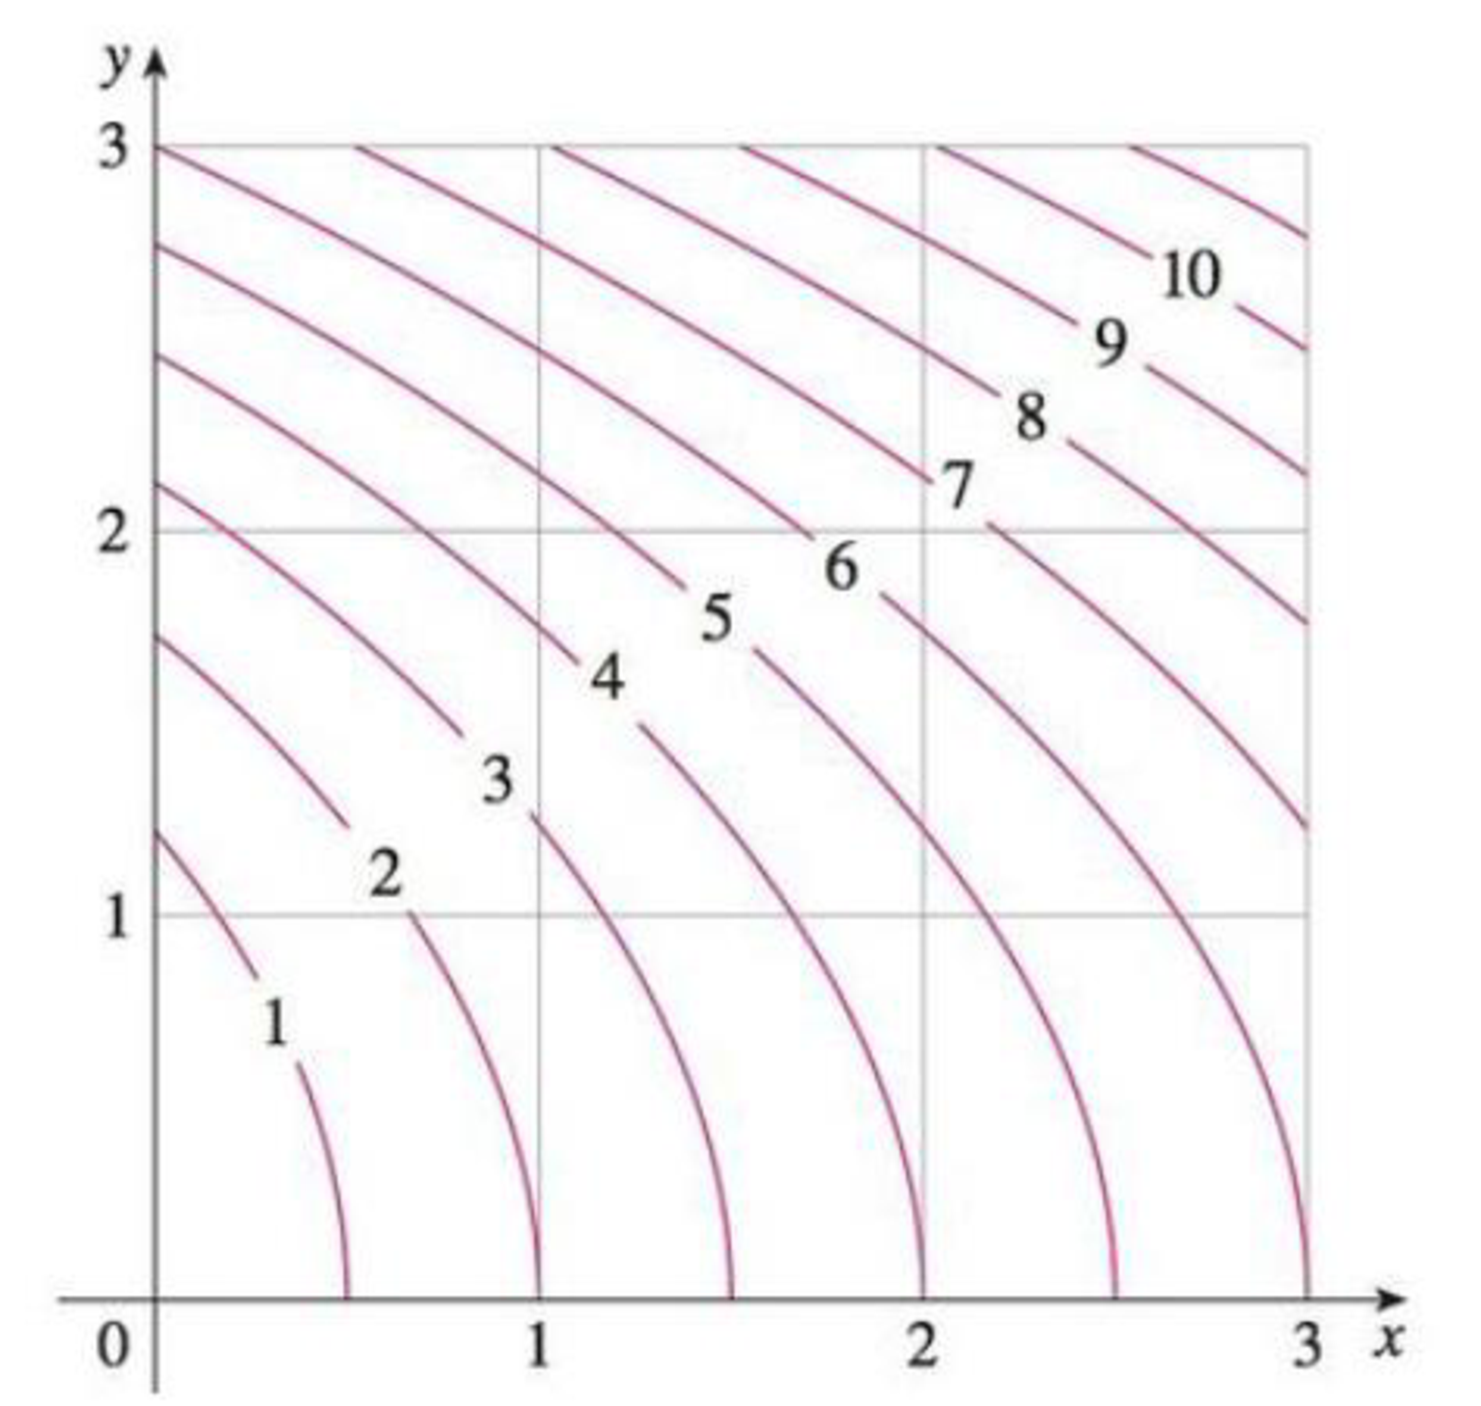 Chapter 12, Problem 2RE, Use the Midpoint Rule to estimate the integral in Exercise 1. 1. A contour map is shown for a 